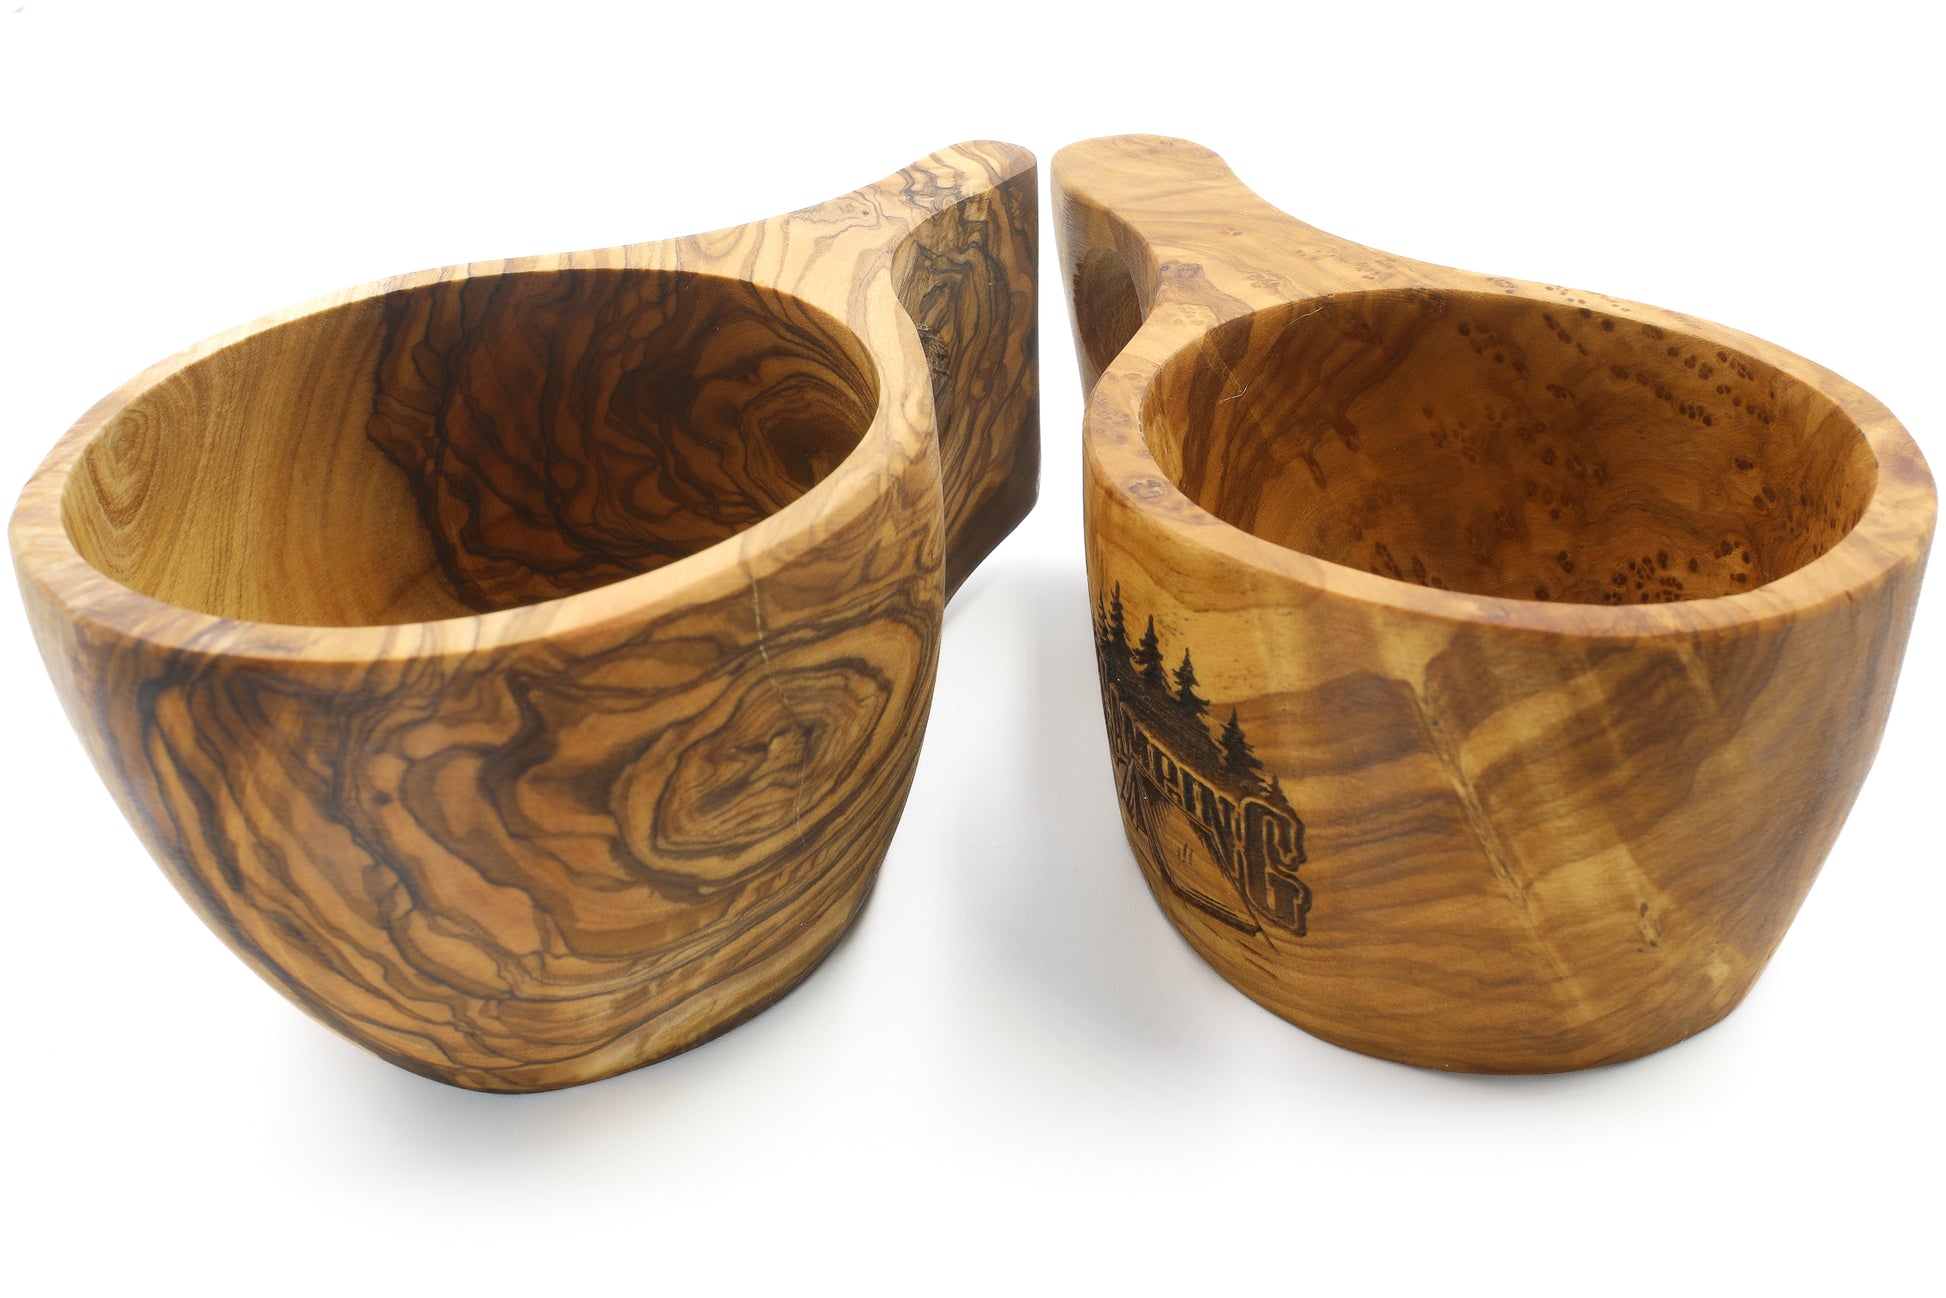 Hand-finished olive wood cup for cozy moments